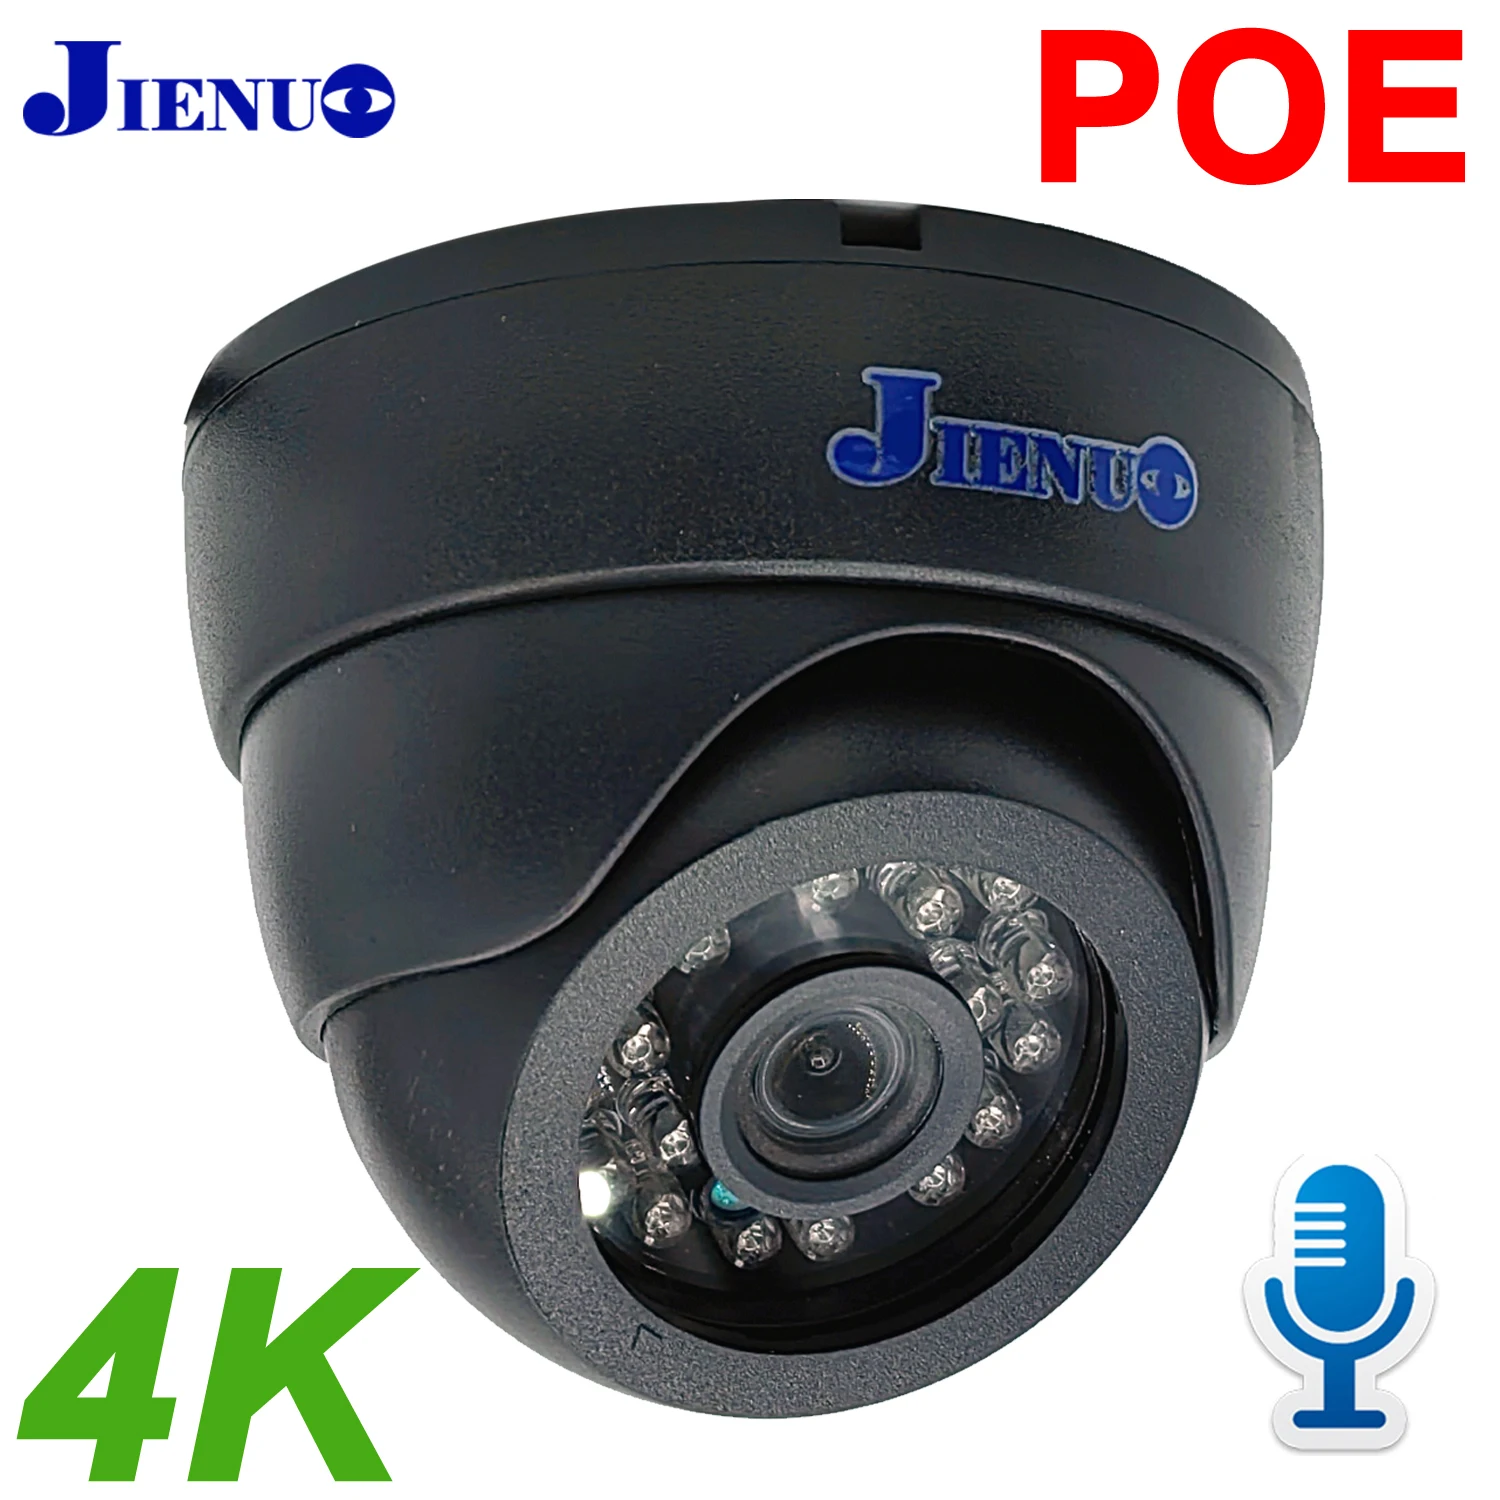 JIENUO 4K Poe Camera IP Dome Security Surveillance System Night Vision 4MP 5MP 8MP Onvif Audio CCTV Video HD Indoor Home Cam Net